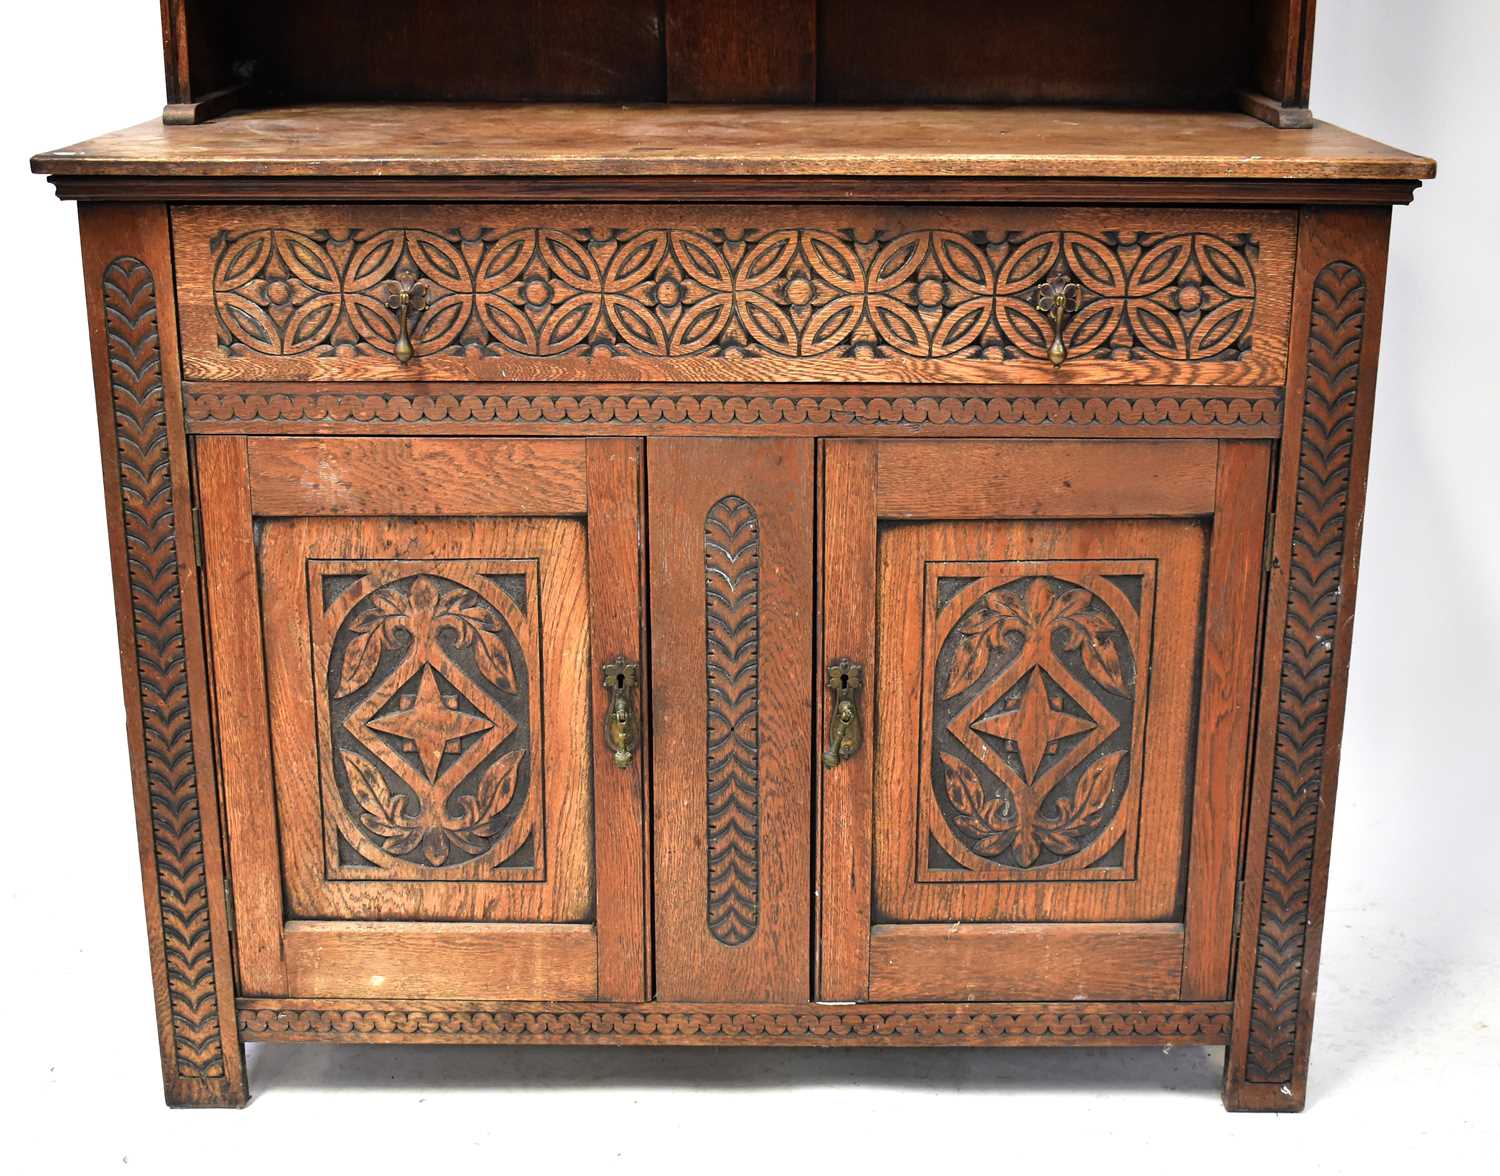 An early 20th century carved oak dresser with enclosed plate rack of three shelves, above a base - Image 2 of 3